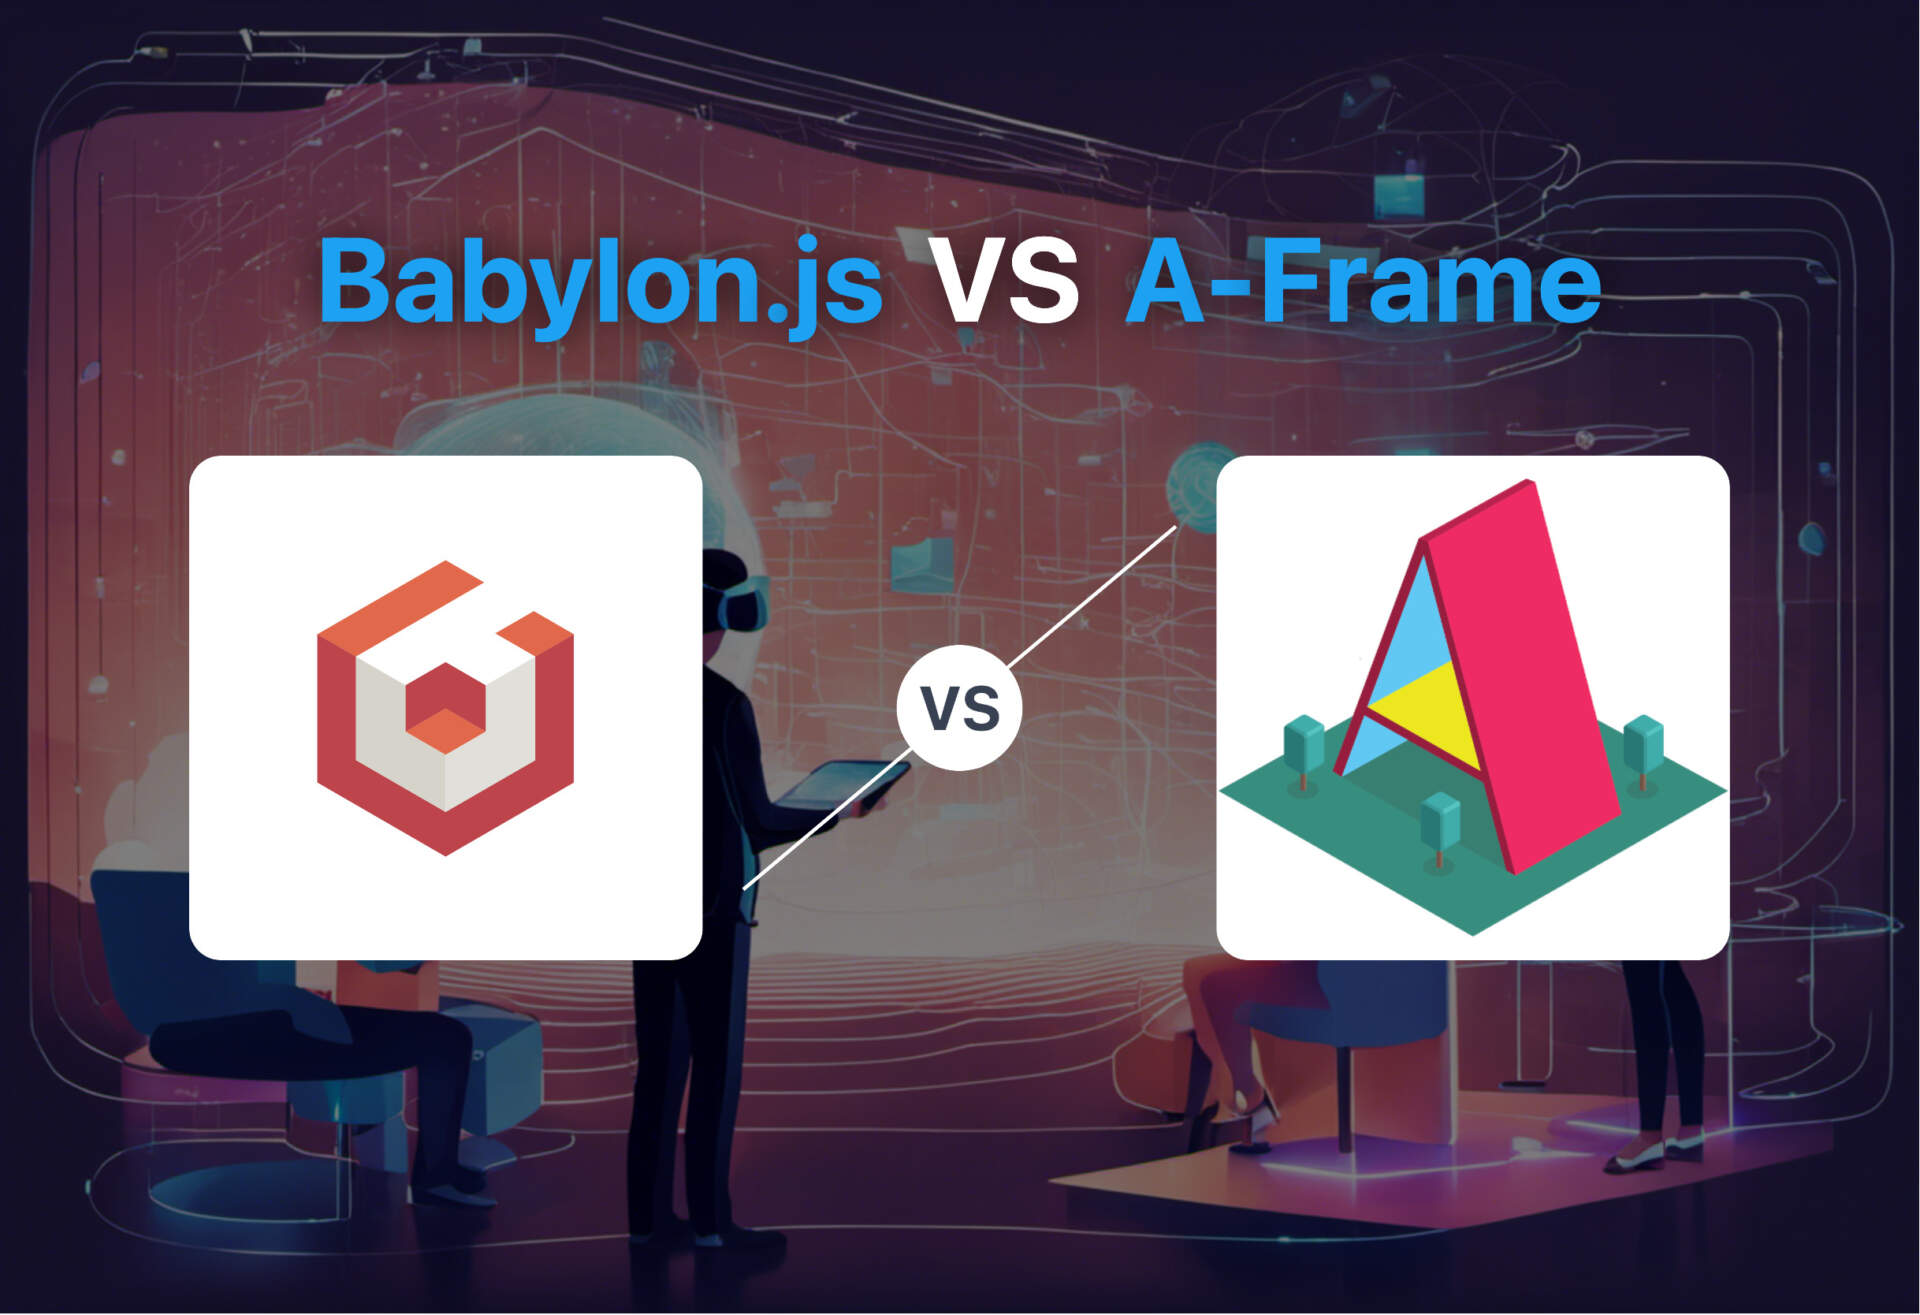 Comparing Babylon.js and A-Frame